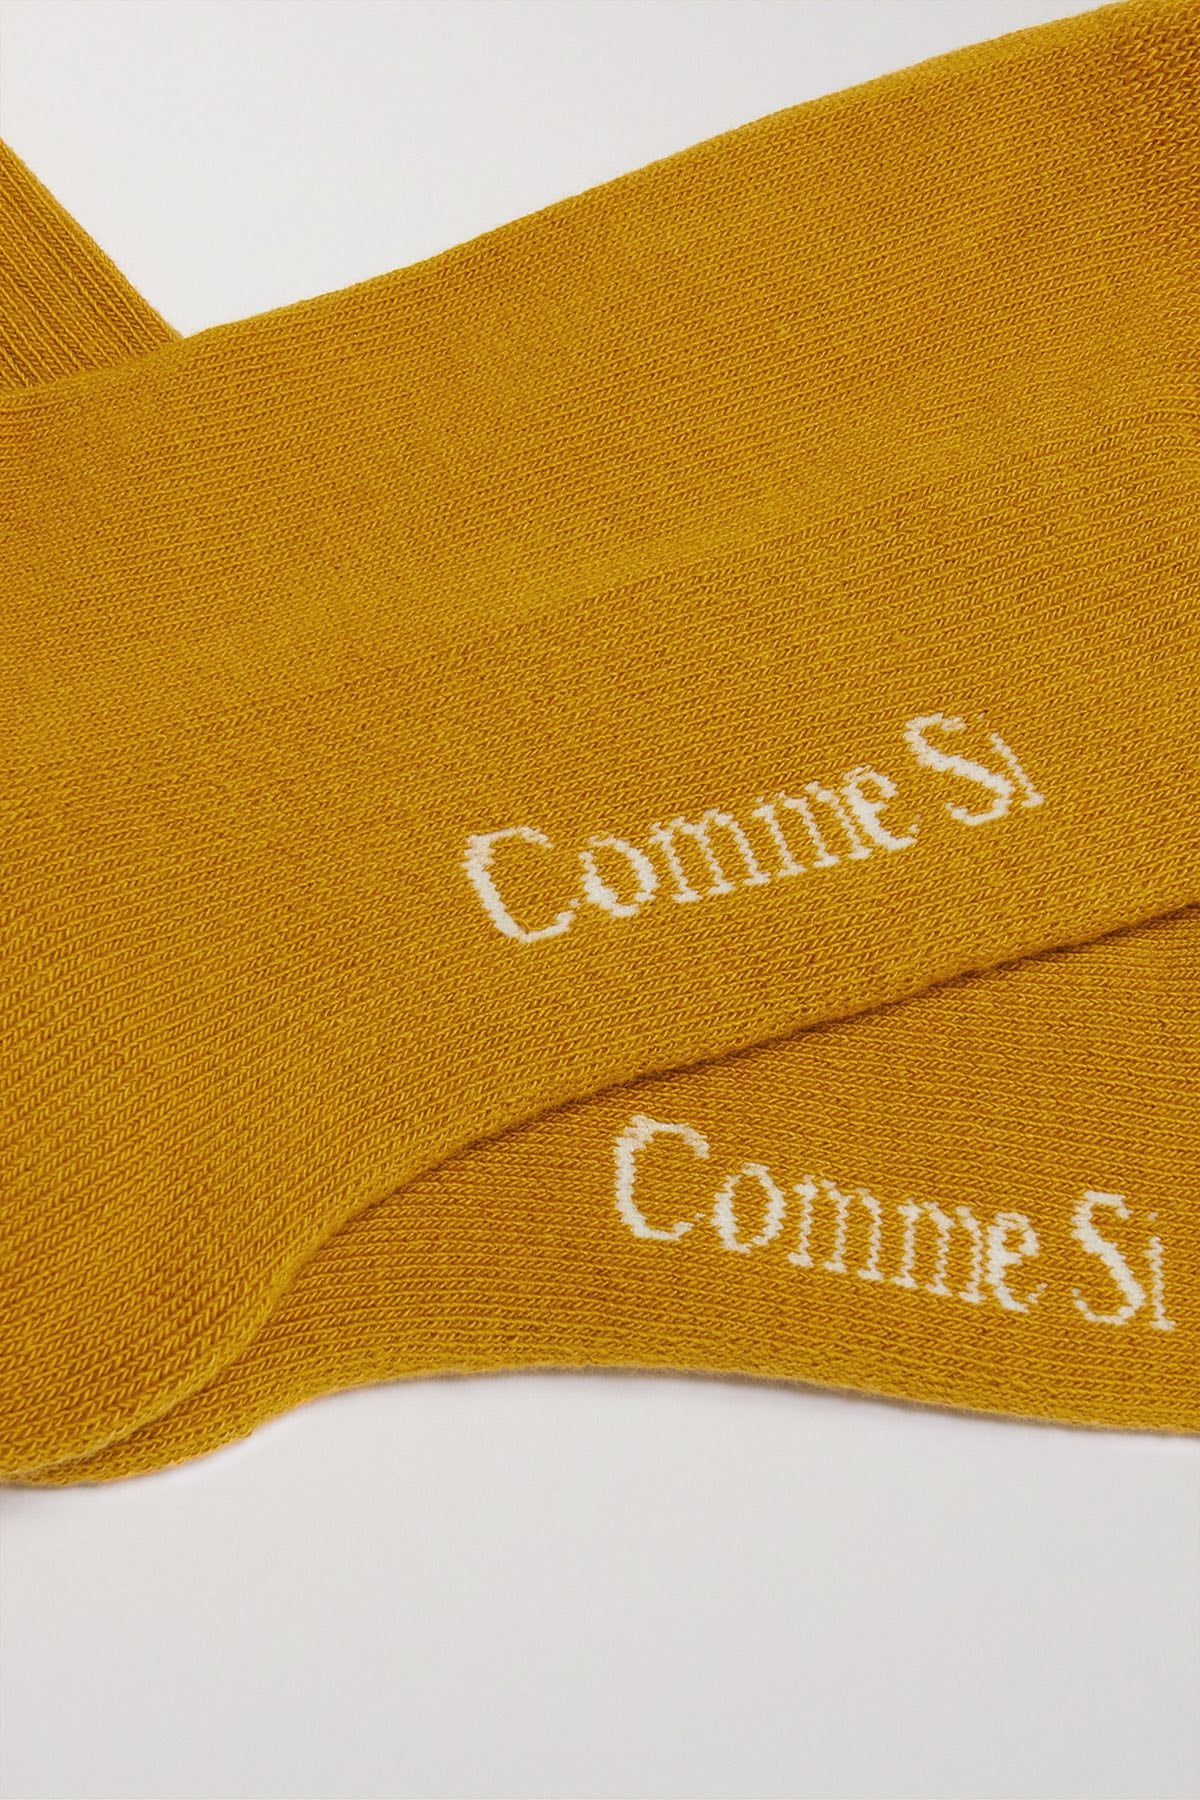 Footbed detail, The Everyday Sock in Turmeric, made with Organic Egyptian Cotton, by Comme Si